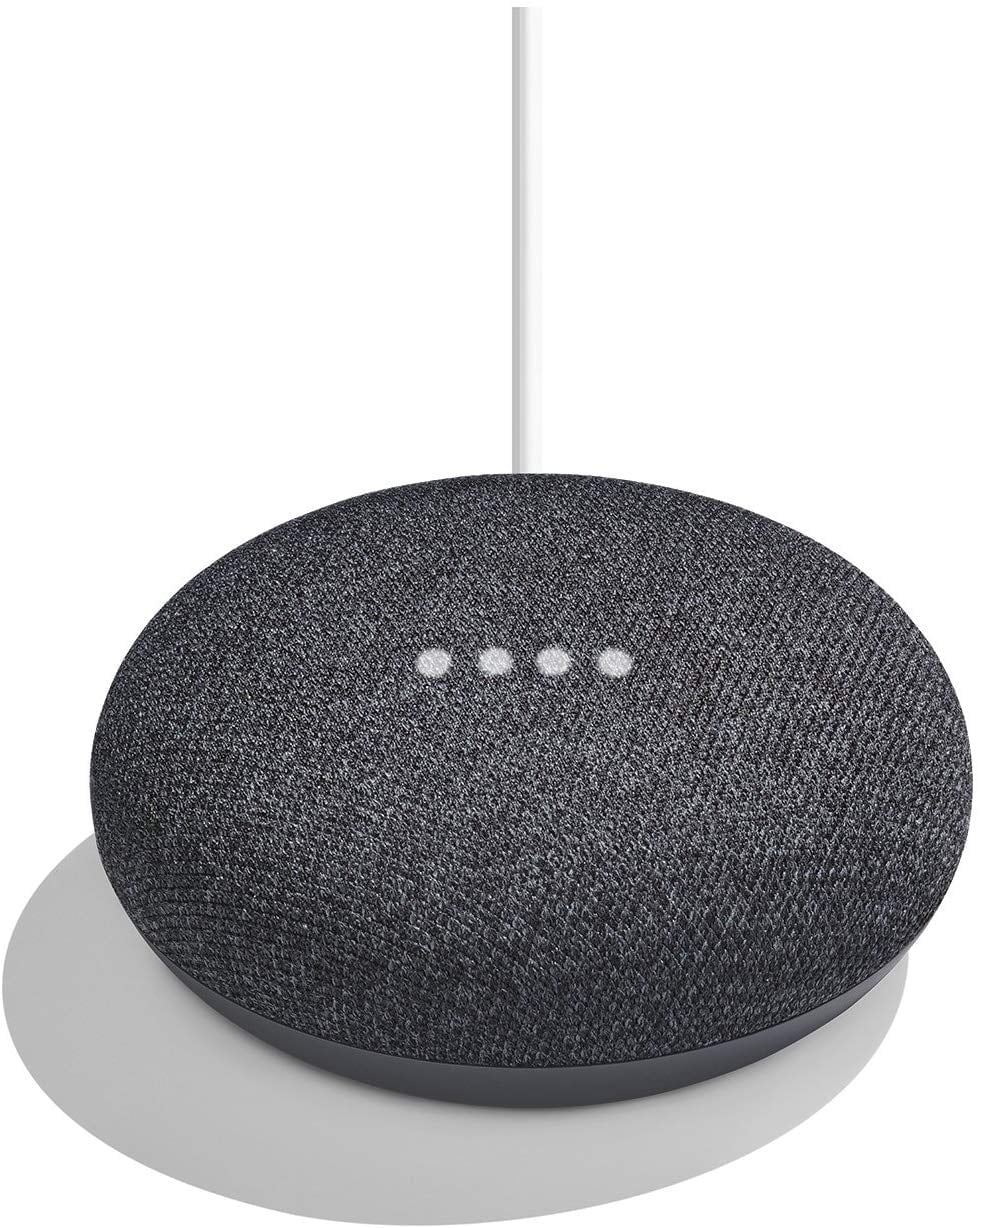 Google The Google Home Mini Wireless Speaker Serves As The Hub Of Home Automation Since It Gets Your Most Important Tasks Done With A Mere Voice Command. This Speaker Is Equipped With The Far-Field Voice Recognition And Thus, Responds To Your Queries, Readies The Grocery List For You And Plays You Your Favorite Music As Well As Videos With The Wifi As Well As Bluetooth Connectivity Without You Lifting Even A Finger. &Amp;Lt;H3 Class=&Amp;Quot;Mqn-Ag3&Amp;Quot;&Amp;Gt;Control Your Smart Home With Your Voice.&Amp;Lt;/H3&Amp;Gt; &Amp;Lt;Div Class=&Amp;Quot;Mqn-Afp&Amp;Quot;&Amp;Gt;Google Home Mini Works With More Than 5,000 Smart Home Devices From More Than 150 Brands.&Amp;Lt;/Div&Amp;Gt; &Amp;Lt;Strong&Amp;Gt;Product Website:&Amp;Lt;/Strong&Amp;Gt; Https://Store.google.com/Us/Product/Google_Home_Mini?Hl=En-Us &Amp;Nbsp; &Amp;Nbsp; Google Home Mini Smart Speaker Charcoal